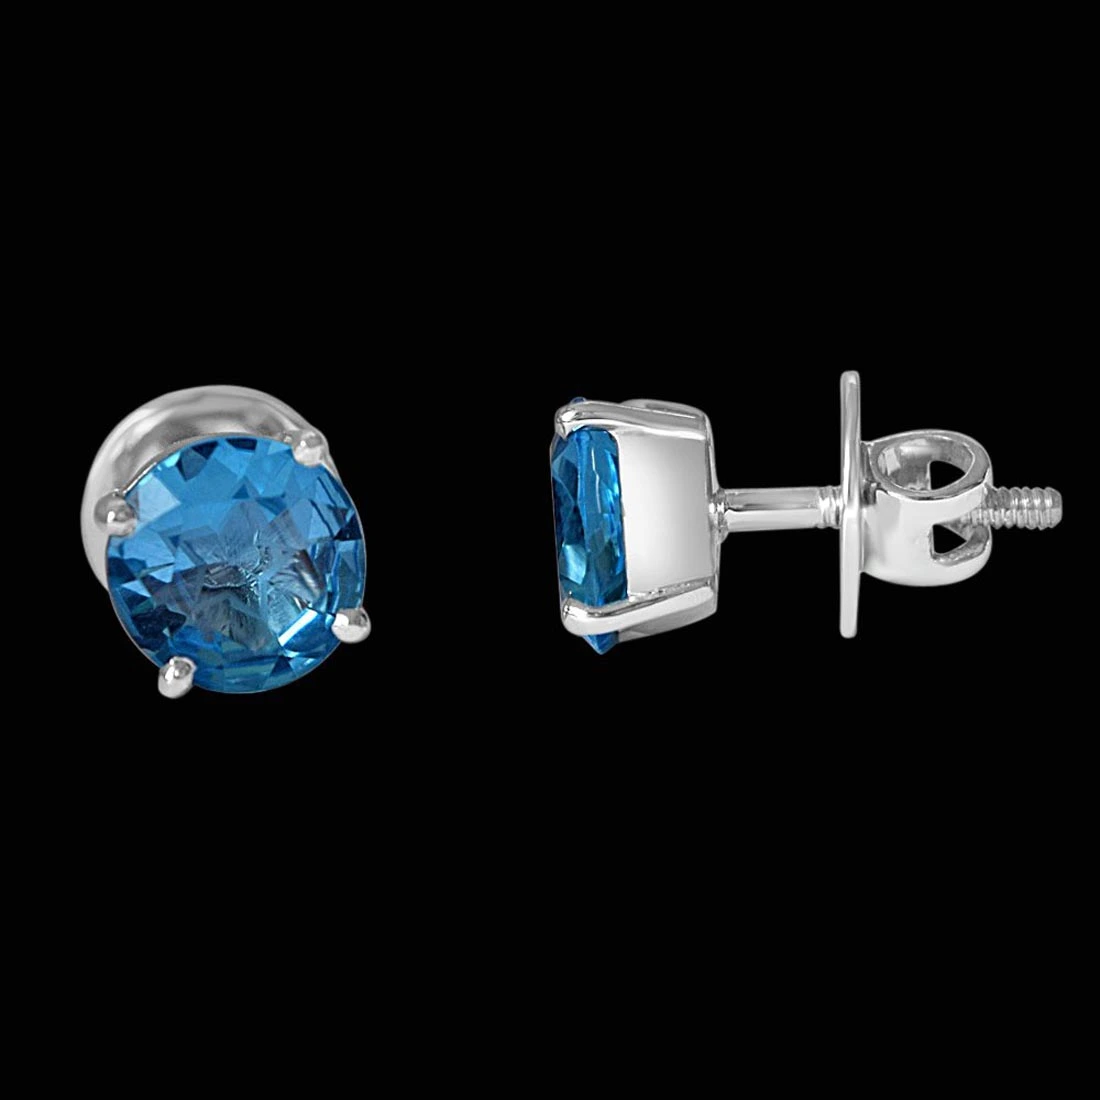 2.00 cts Round Shaped Blue Topaz Gemstone Solitaire Earrings in 925 Sterling Silver (SDE14)